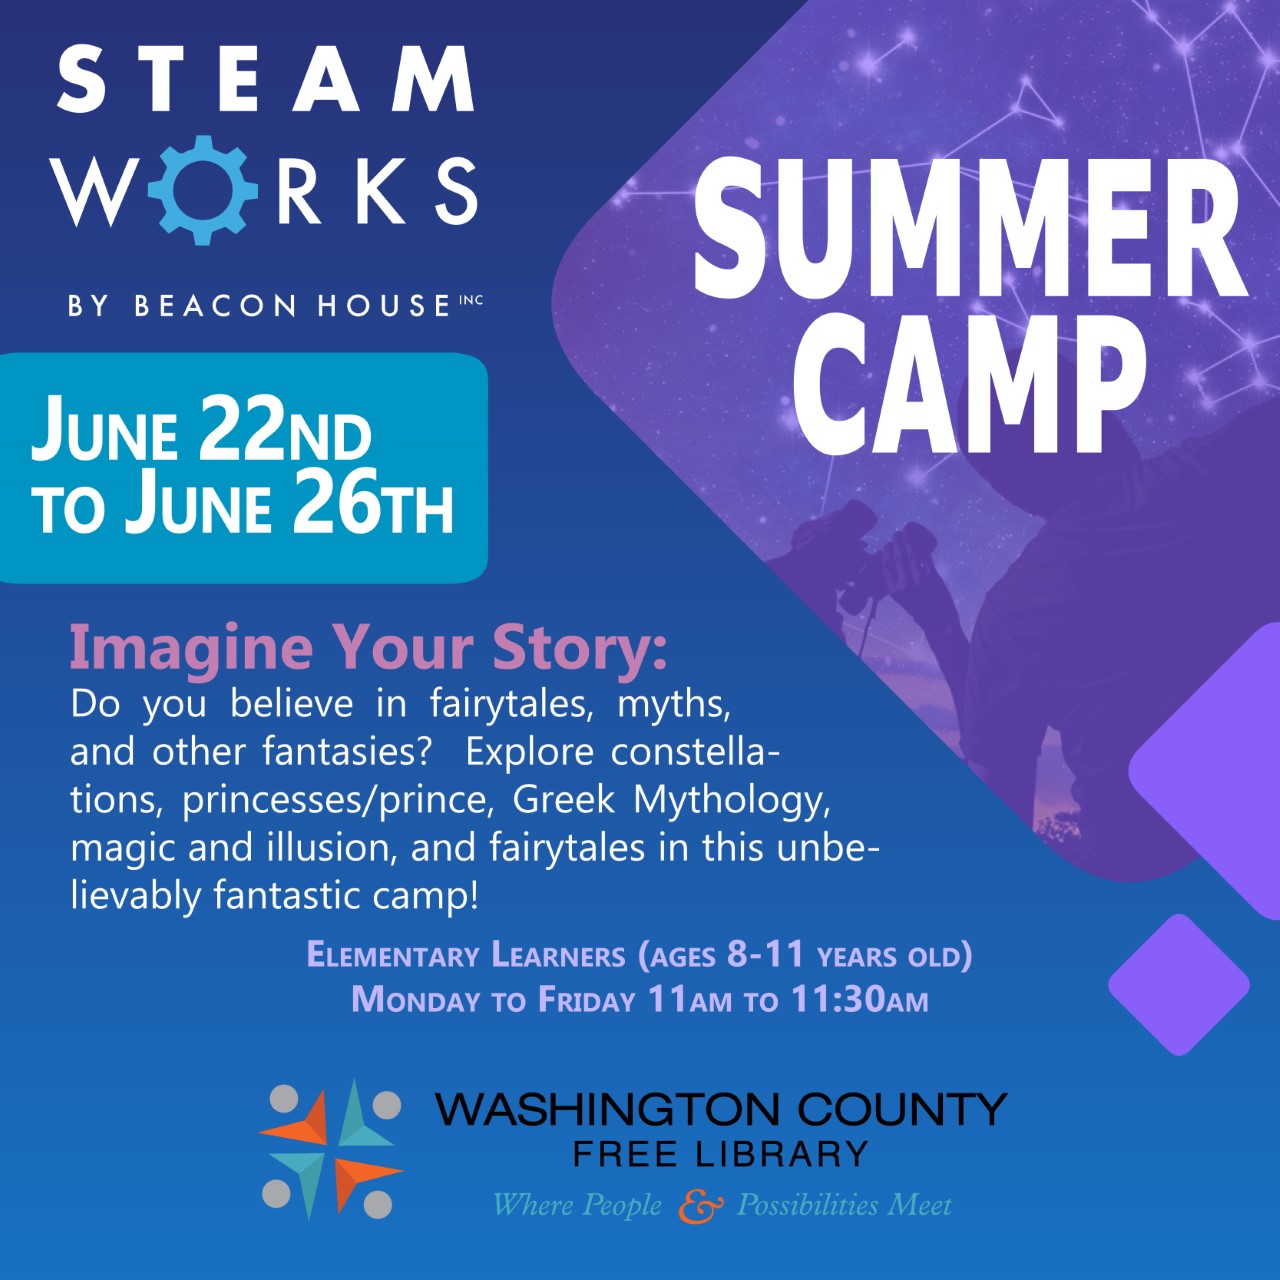 SteamWorks Summer Camp by Beacon House - Ages 8-11